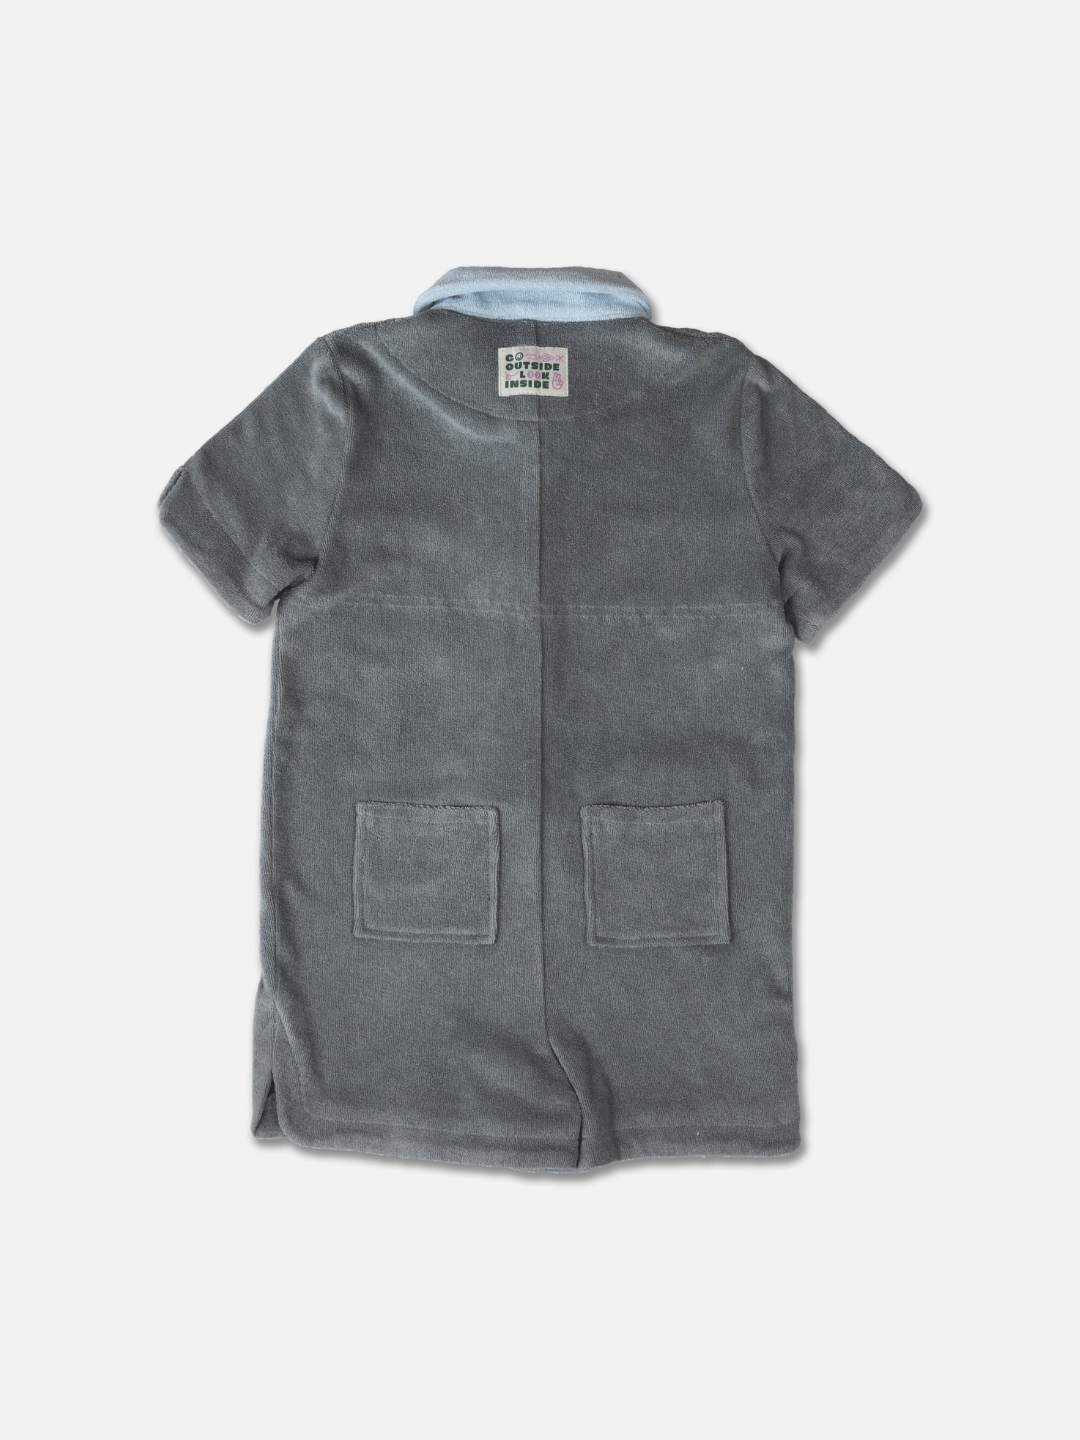 Rear view of a kids' jumpsuit in pale gray with blue collar and two back pockets